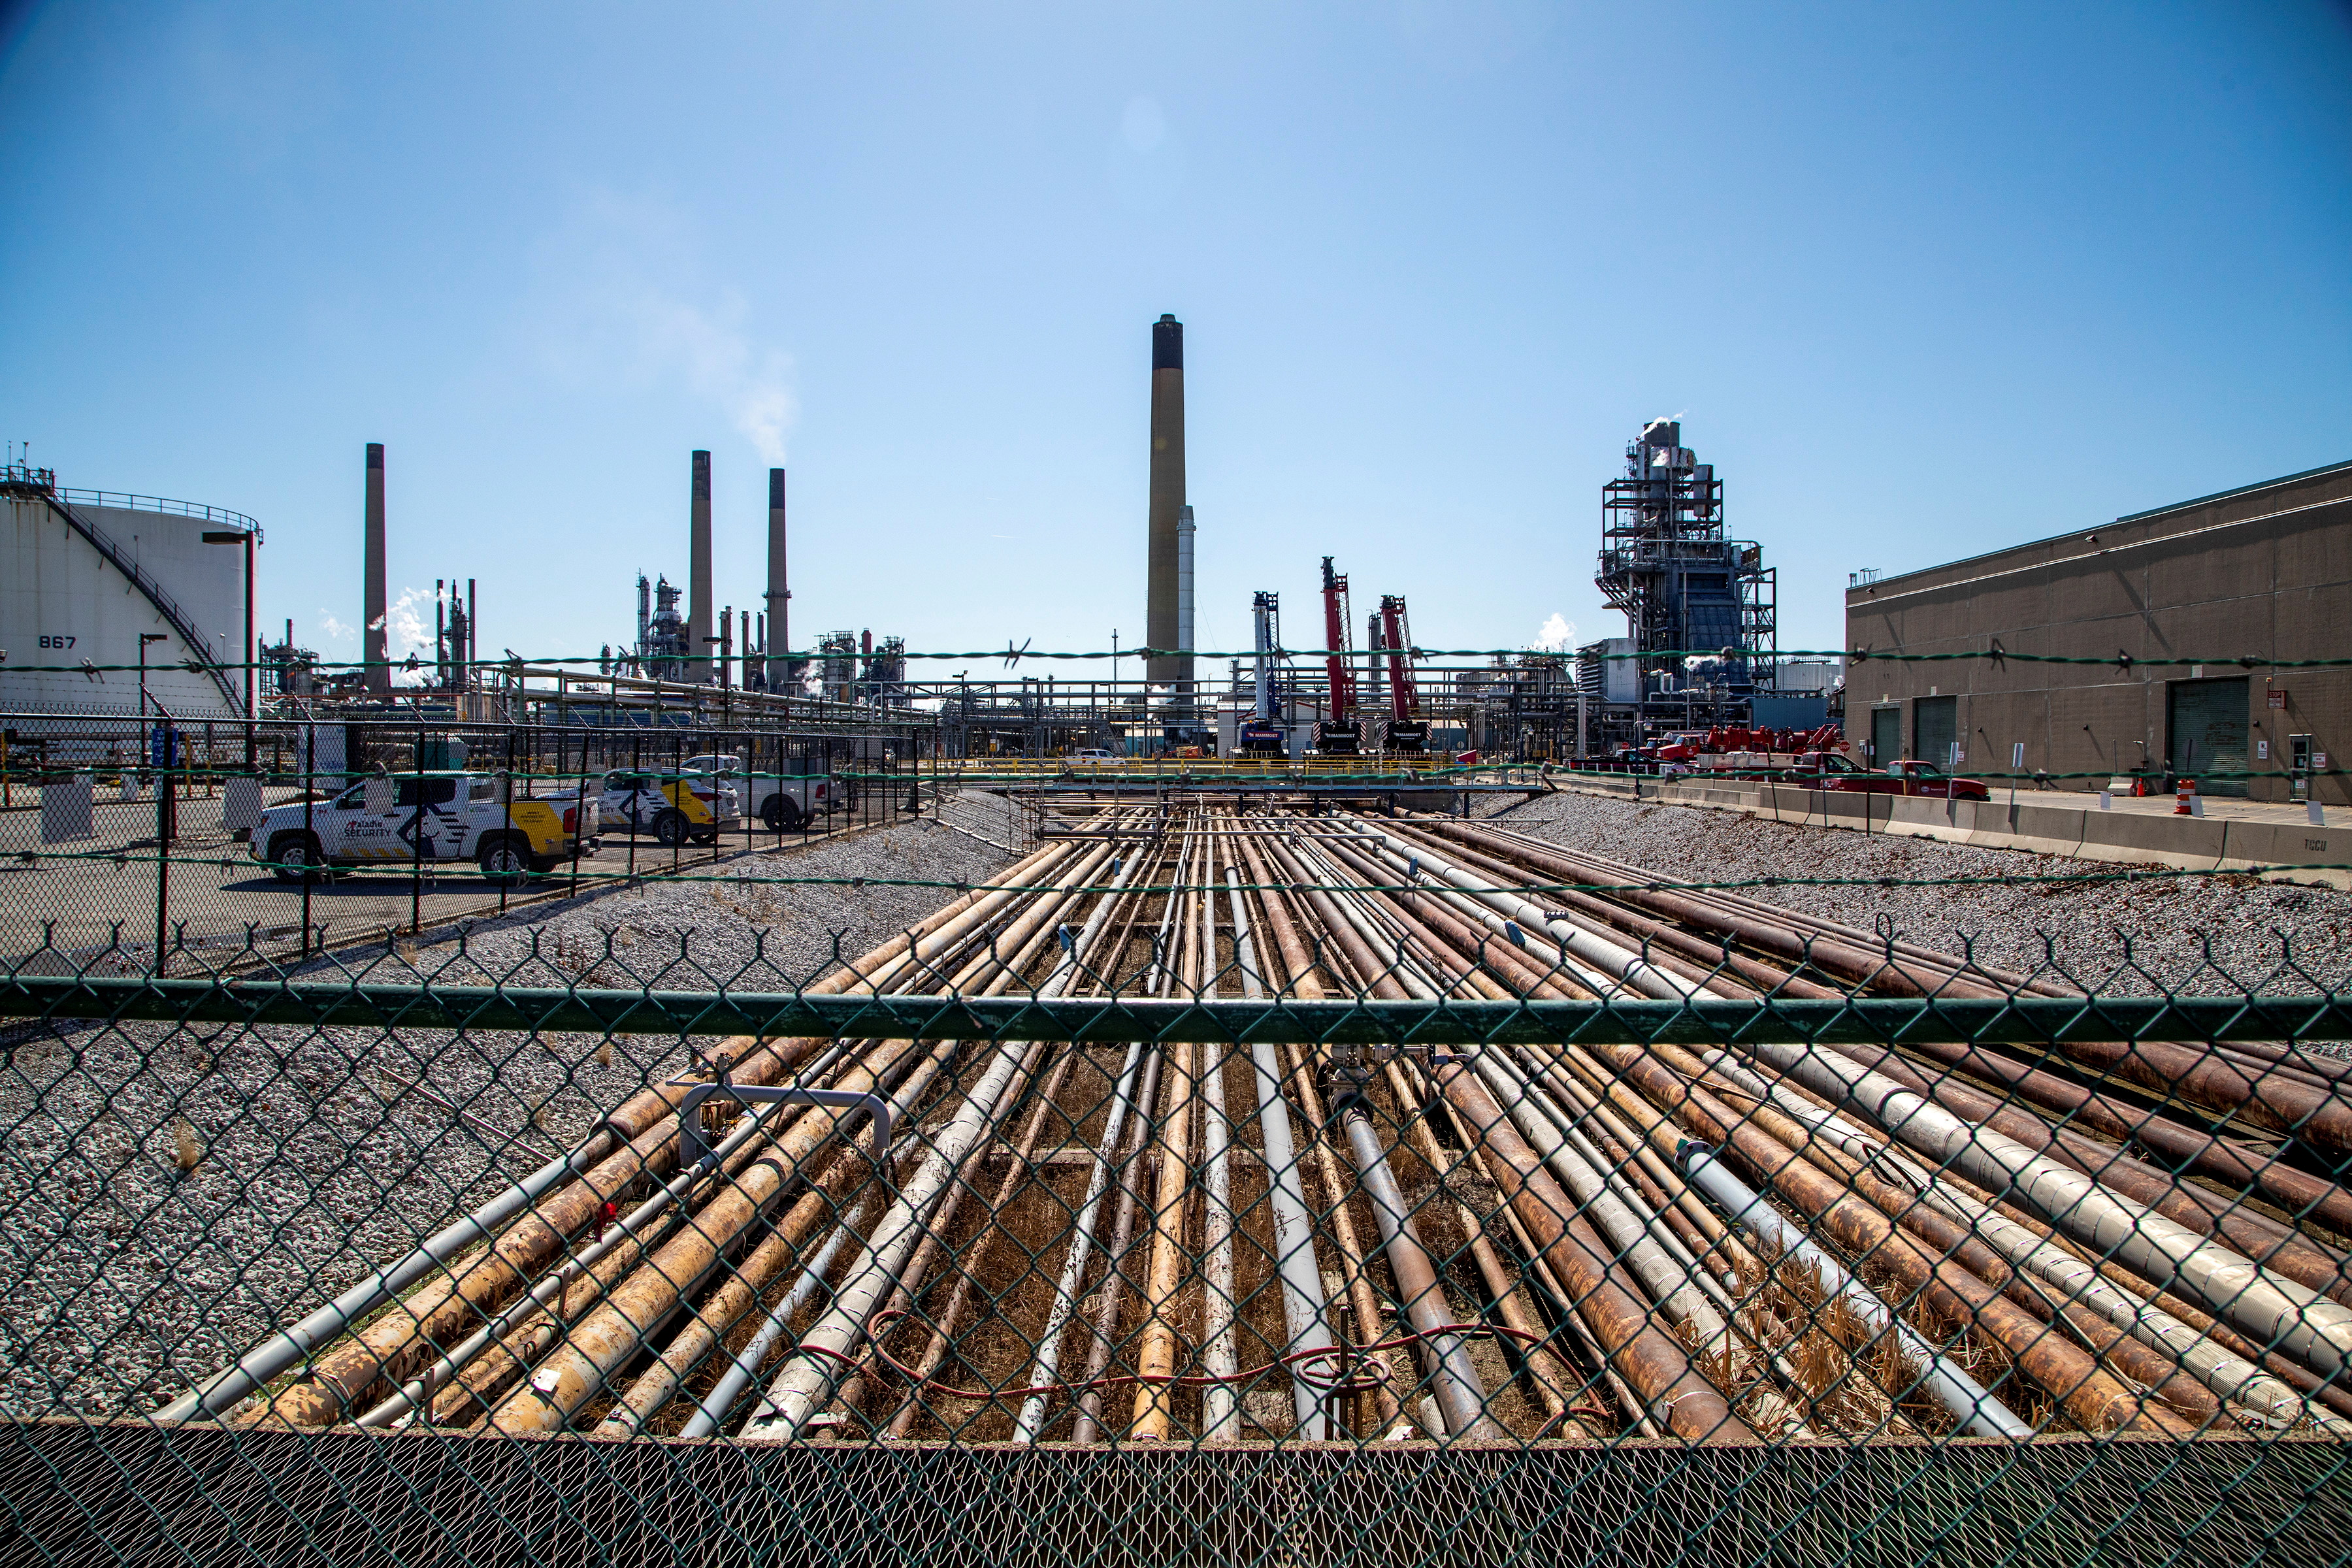 General view of the Imperial Oil refinery, located near Enbridge's Line 5 pipeline, which Michigan Governor Gretchen Whitmer ordered shut down in May 2021, in Sarnia, Ontario, Canada March 20, 2021.  Picture taken through a fence. REUTERS/Carlos Osorio/File Photo